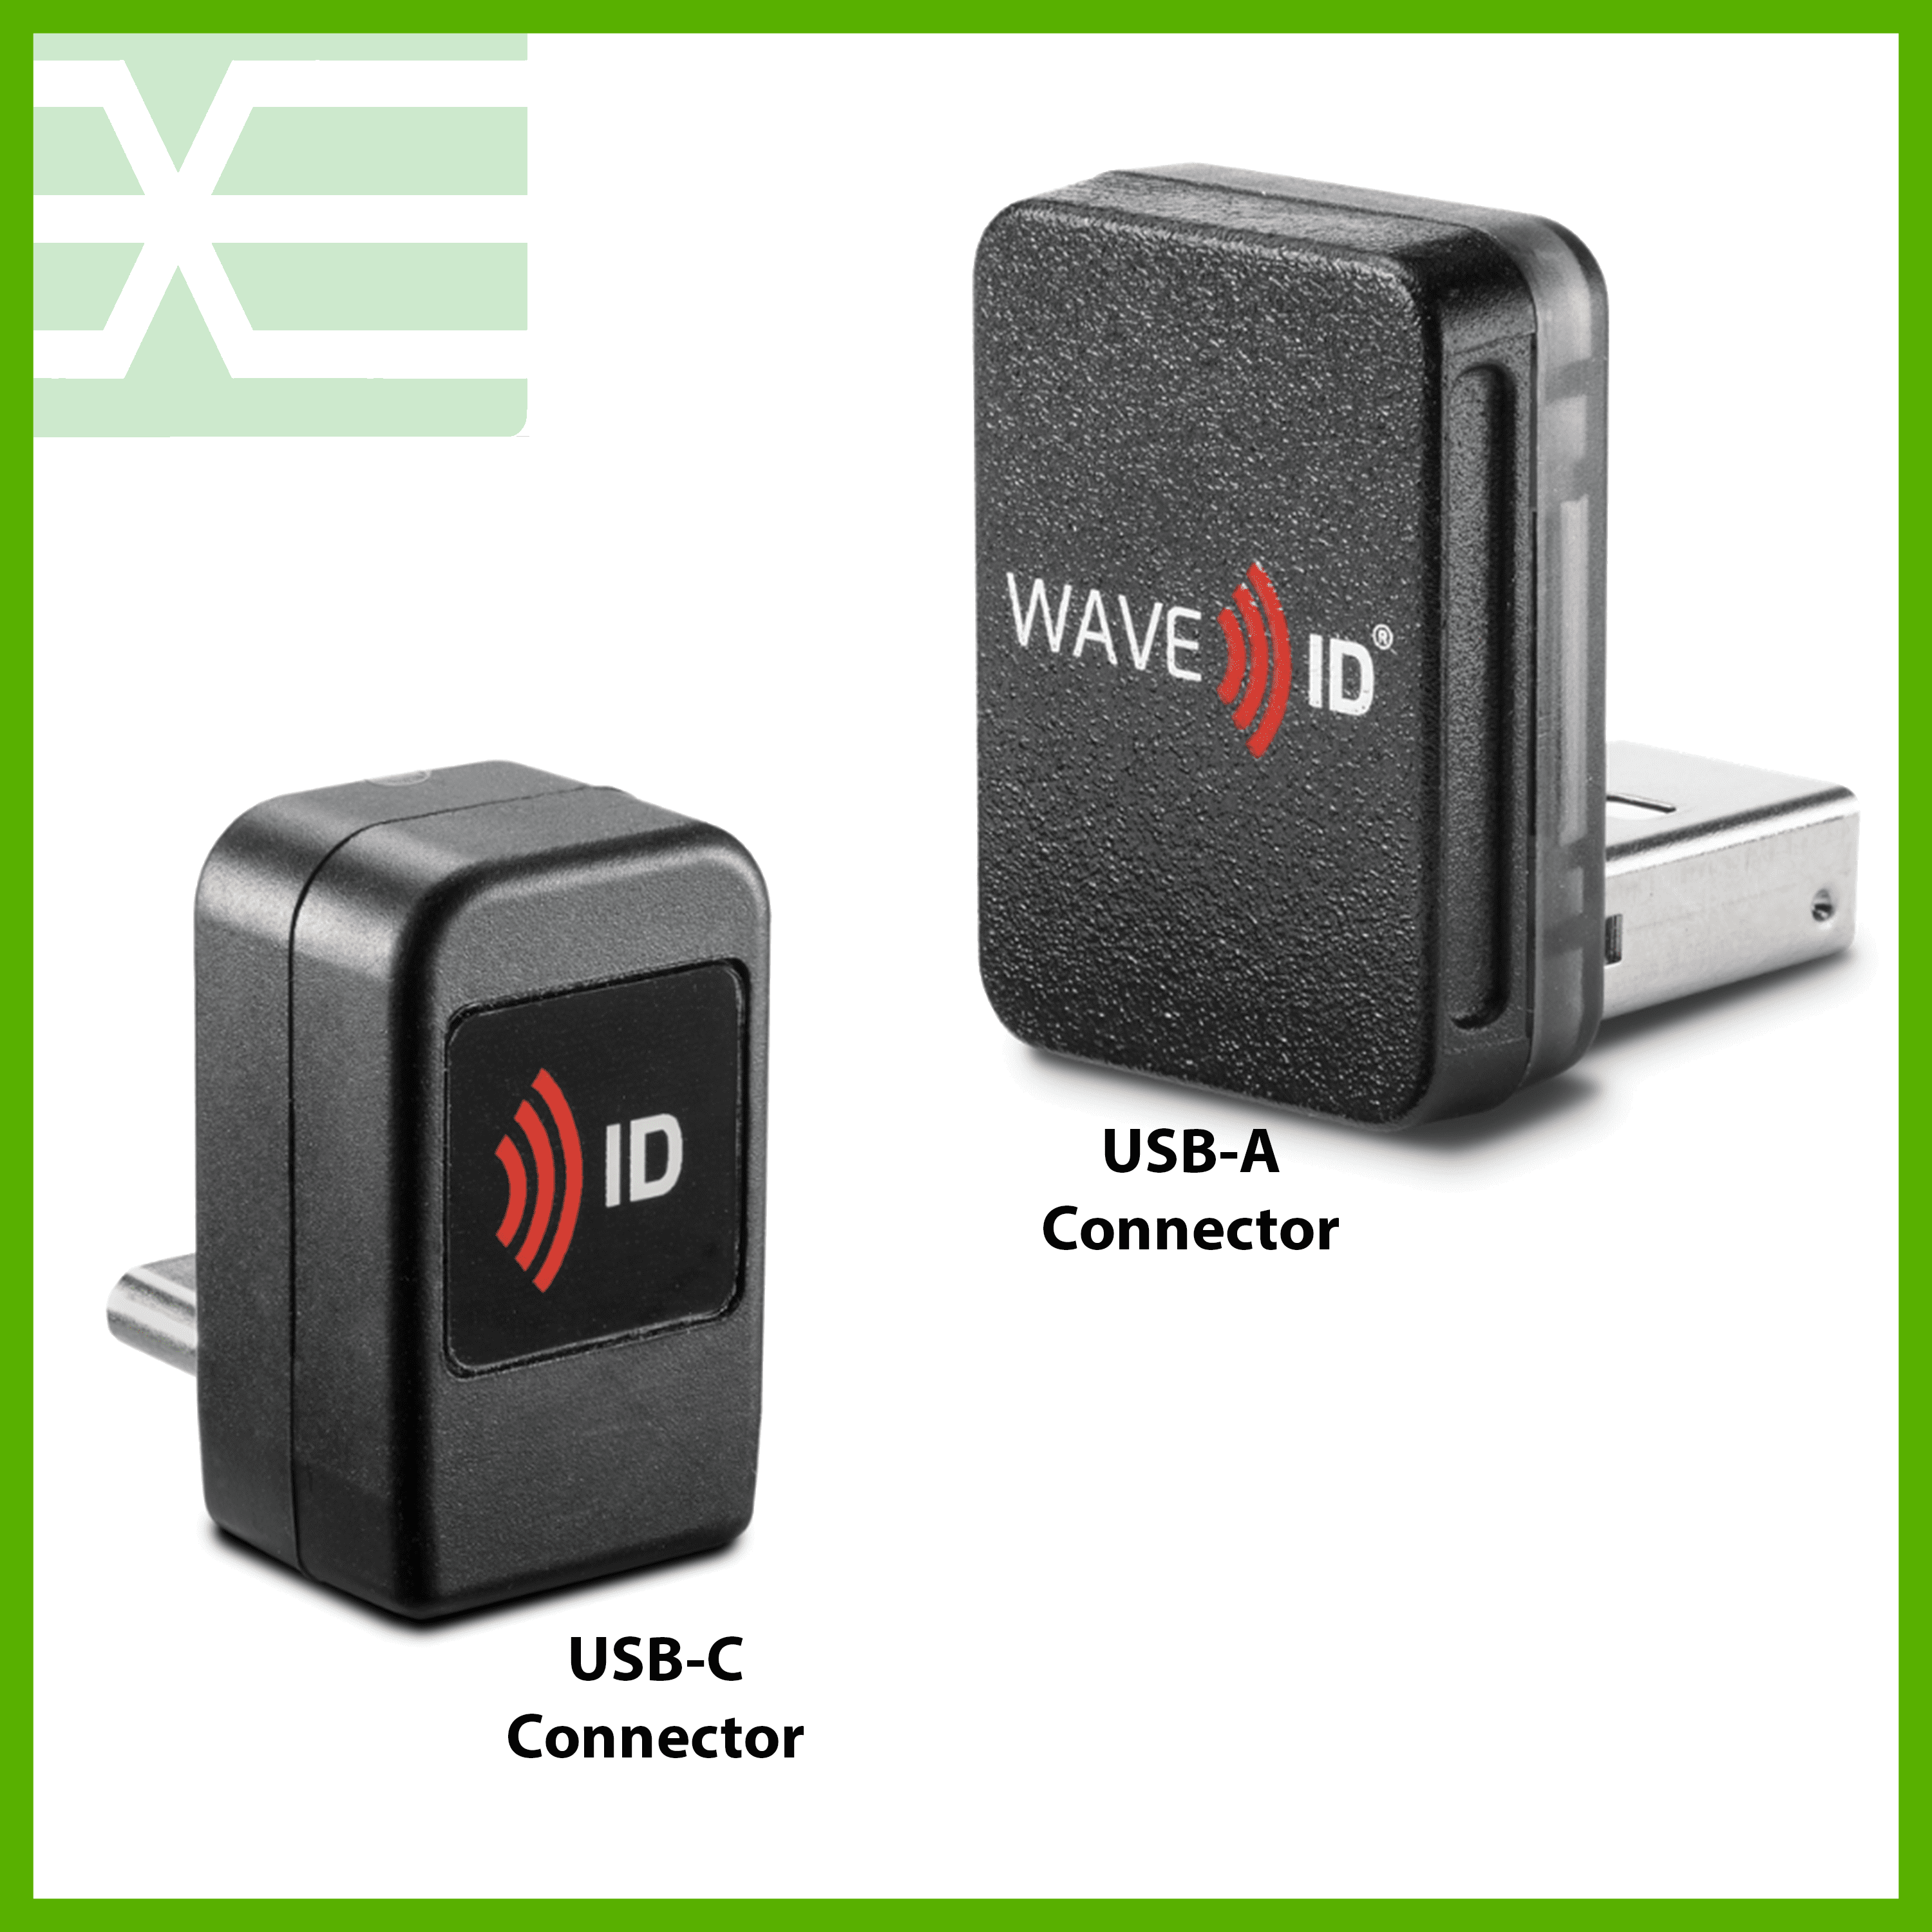 rf IDEAS Nano readers with either USB-A or USB-C connector